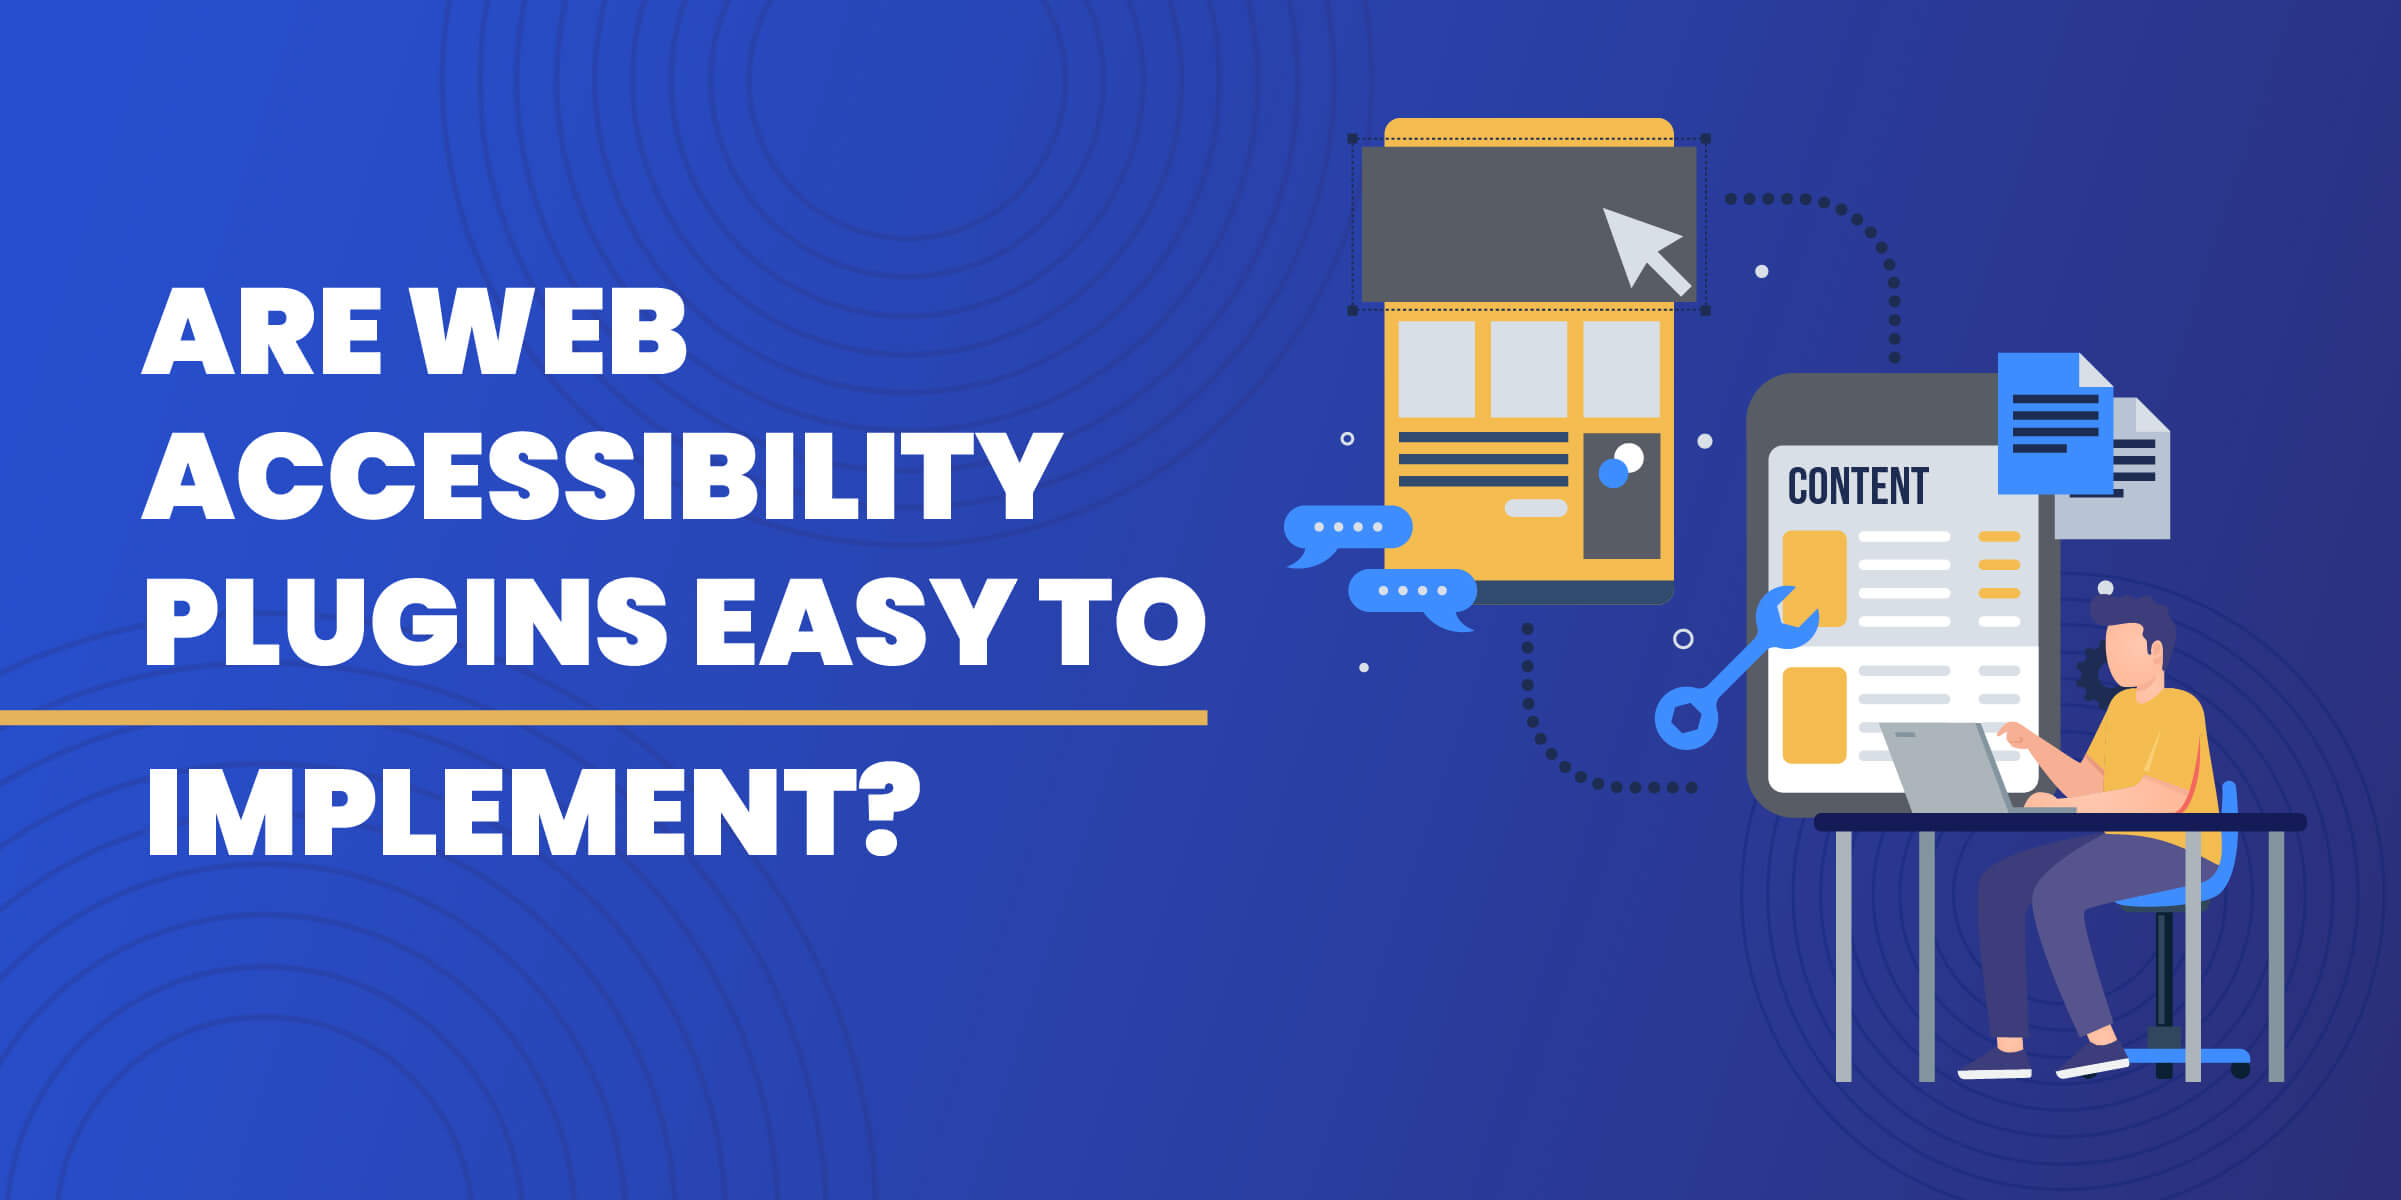 Are Web Accessibility Plugins Easy to Implement